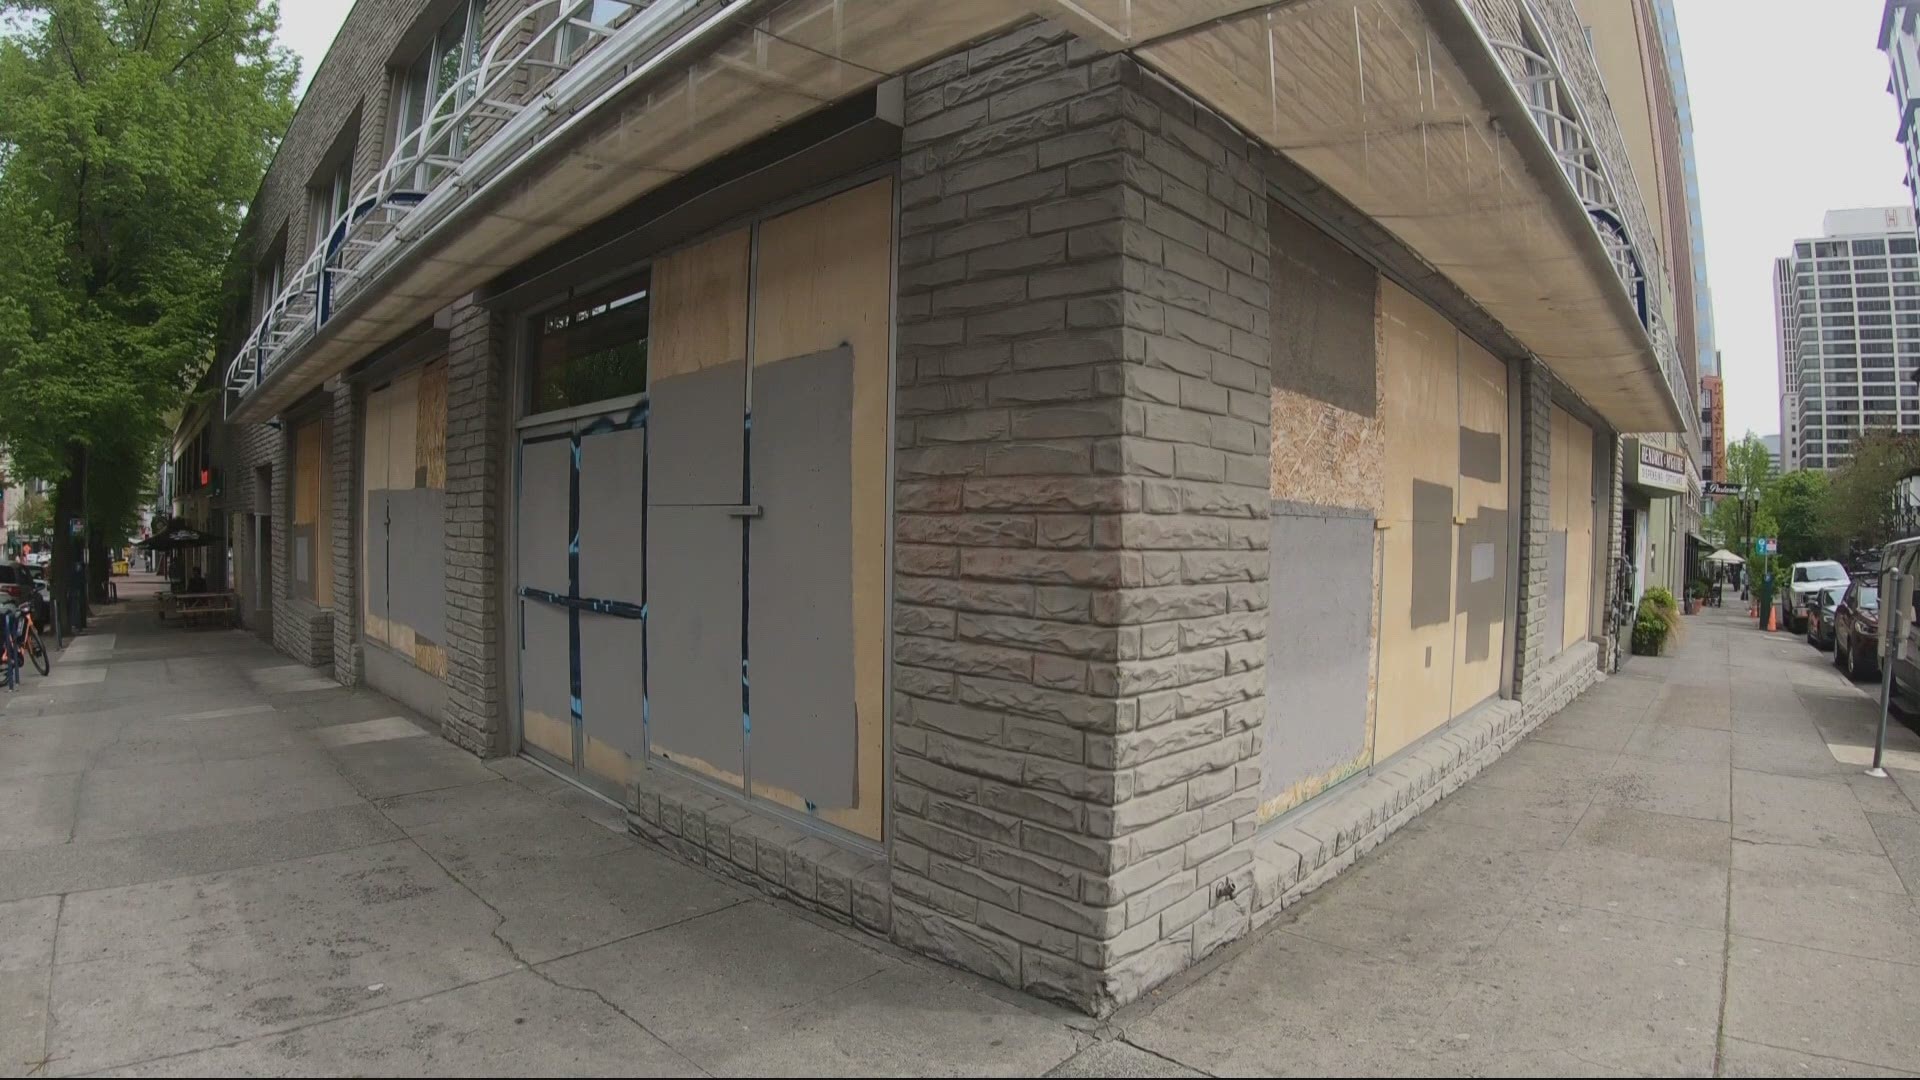 The Portland City Council has approved $250,000 for downtown small businesses. The money will help fix storefronts and clean spray paint left behind by riots.